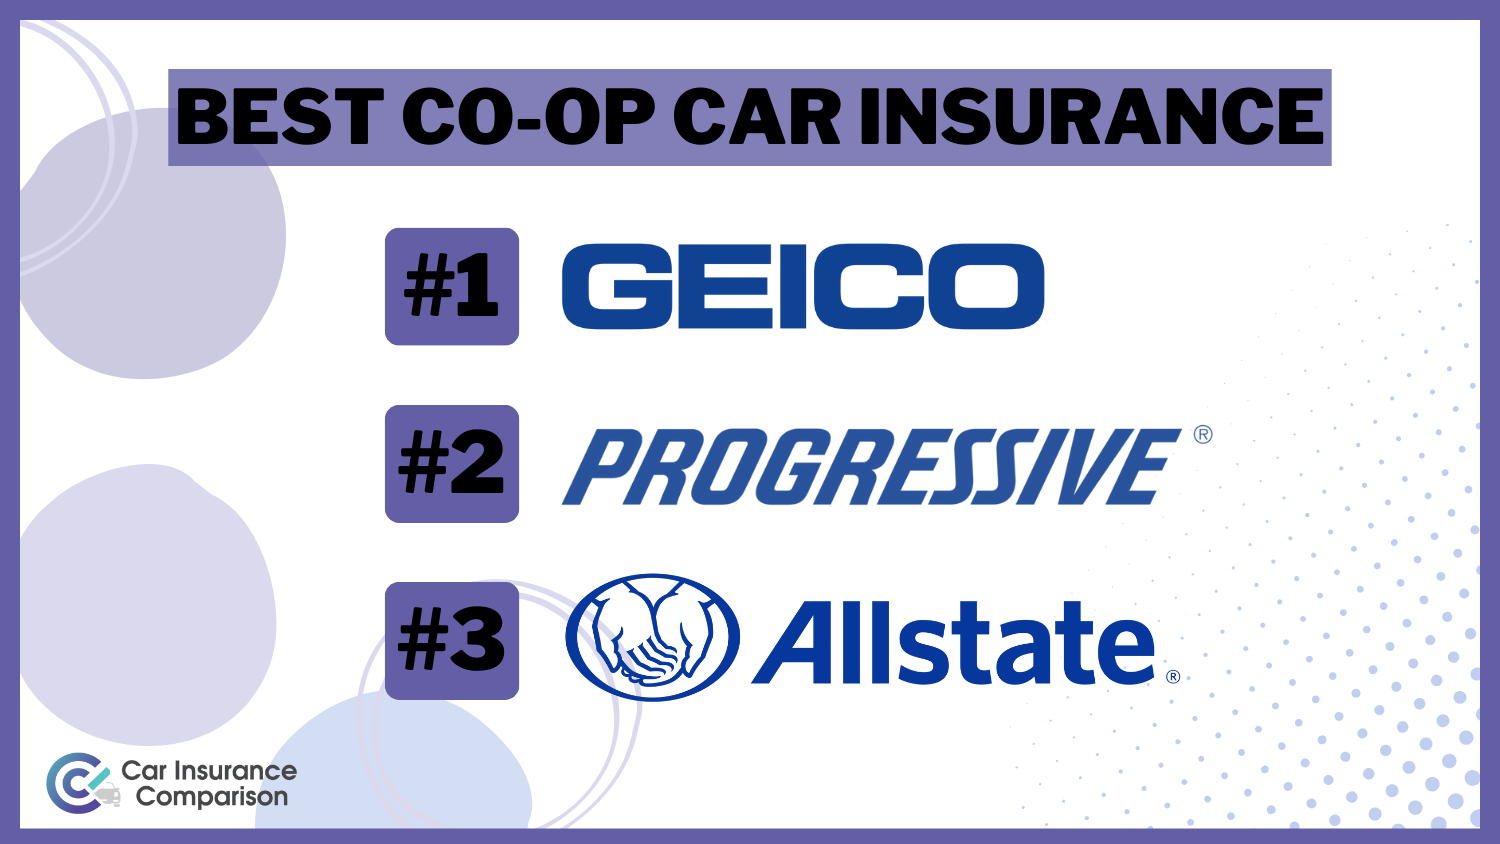 Best Co-Op Car Insurance: Geico, Progressive, and Allstate